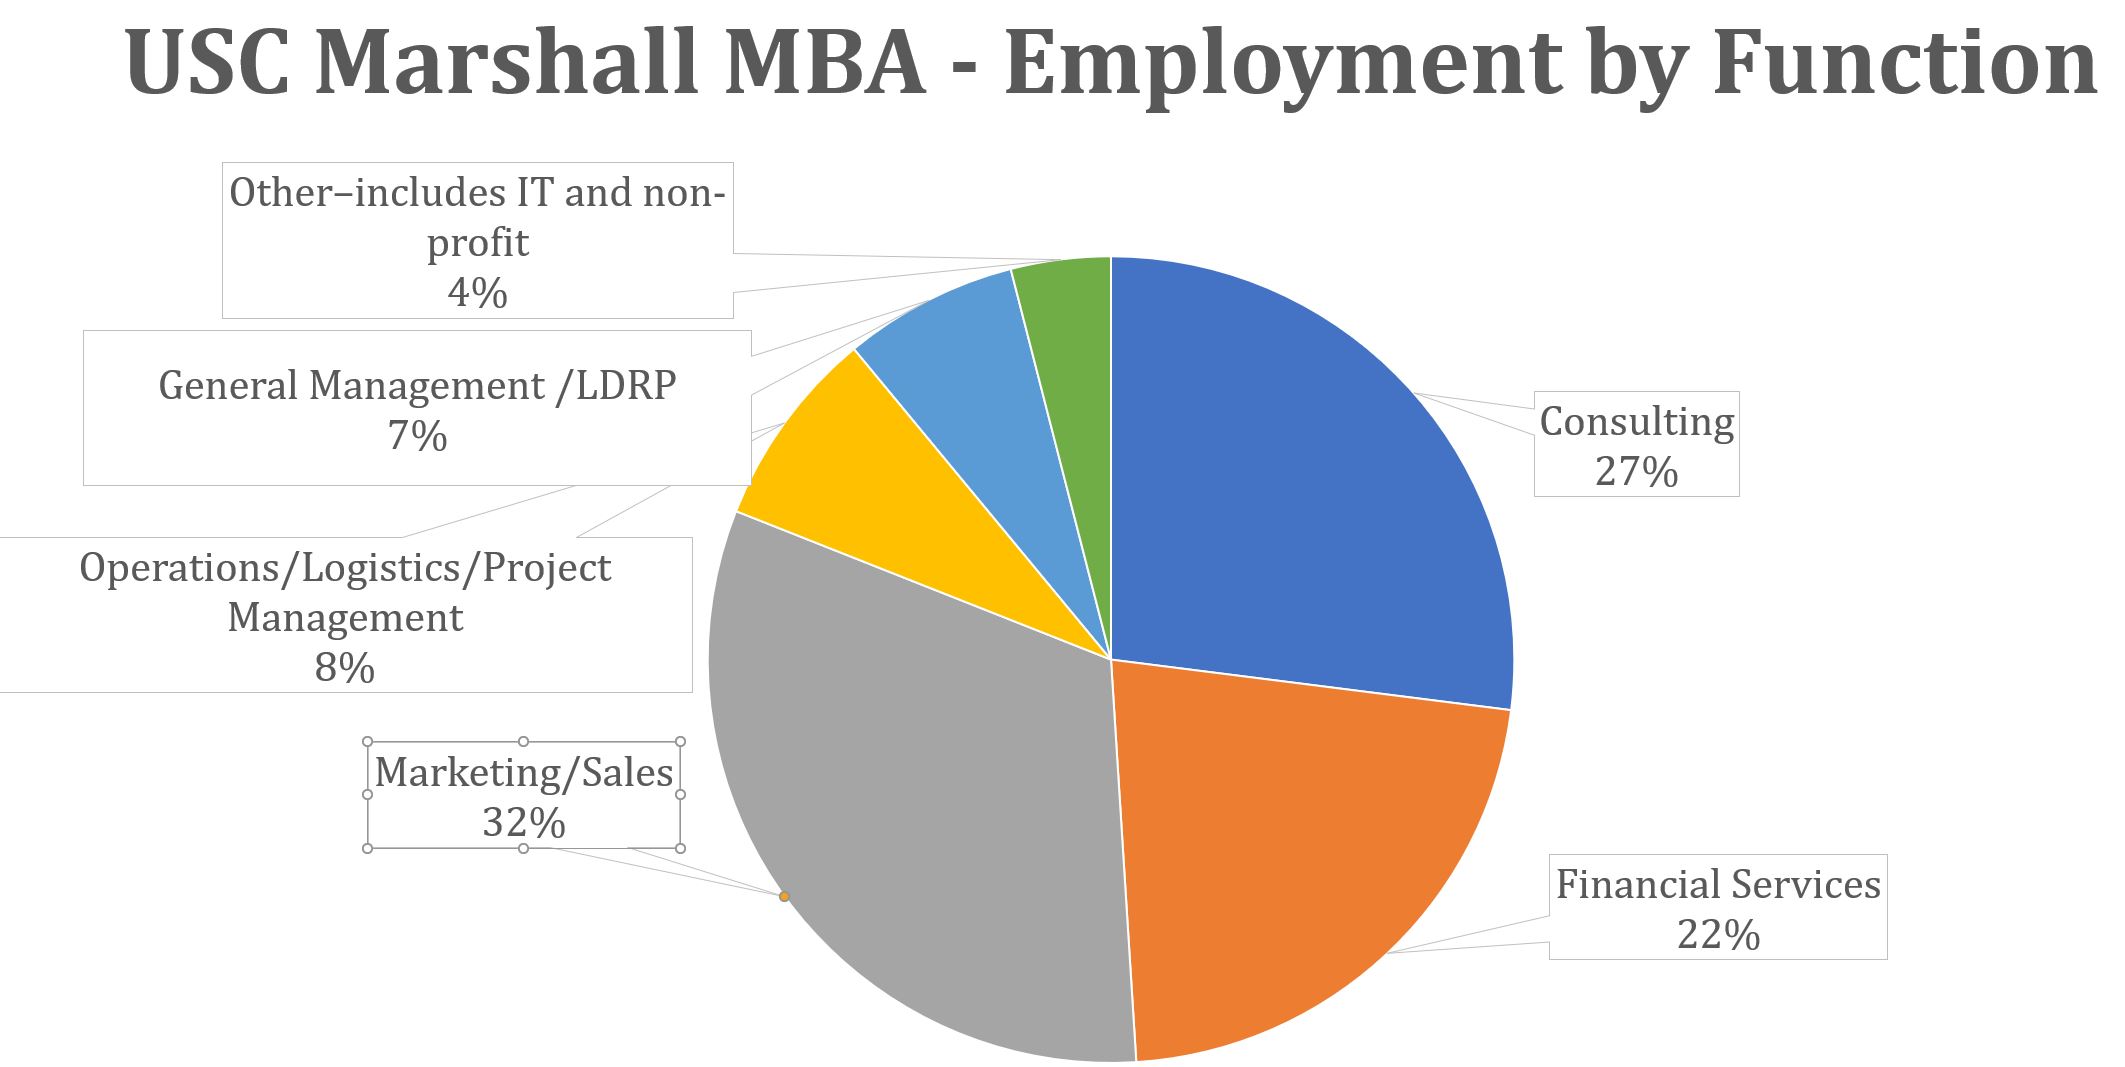 USC Marshall MBA - Employment by Function